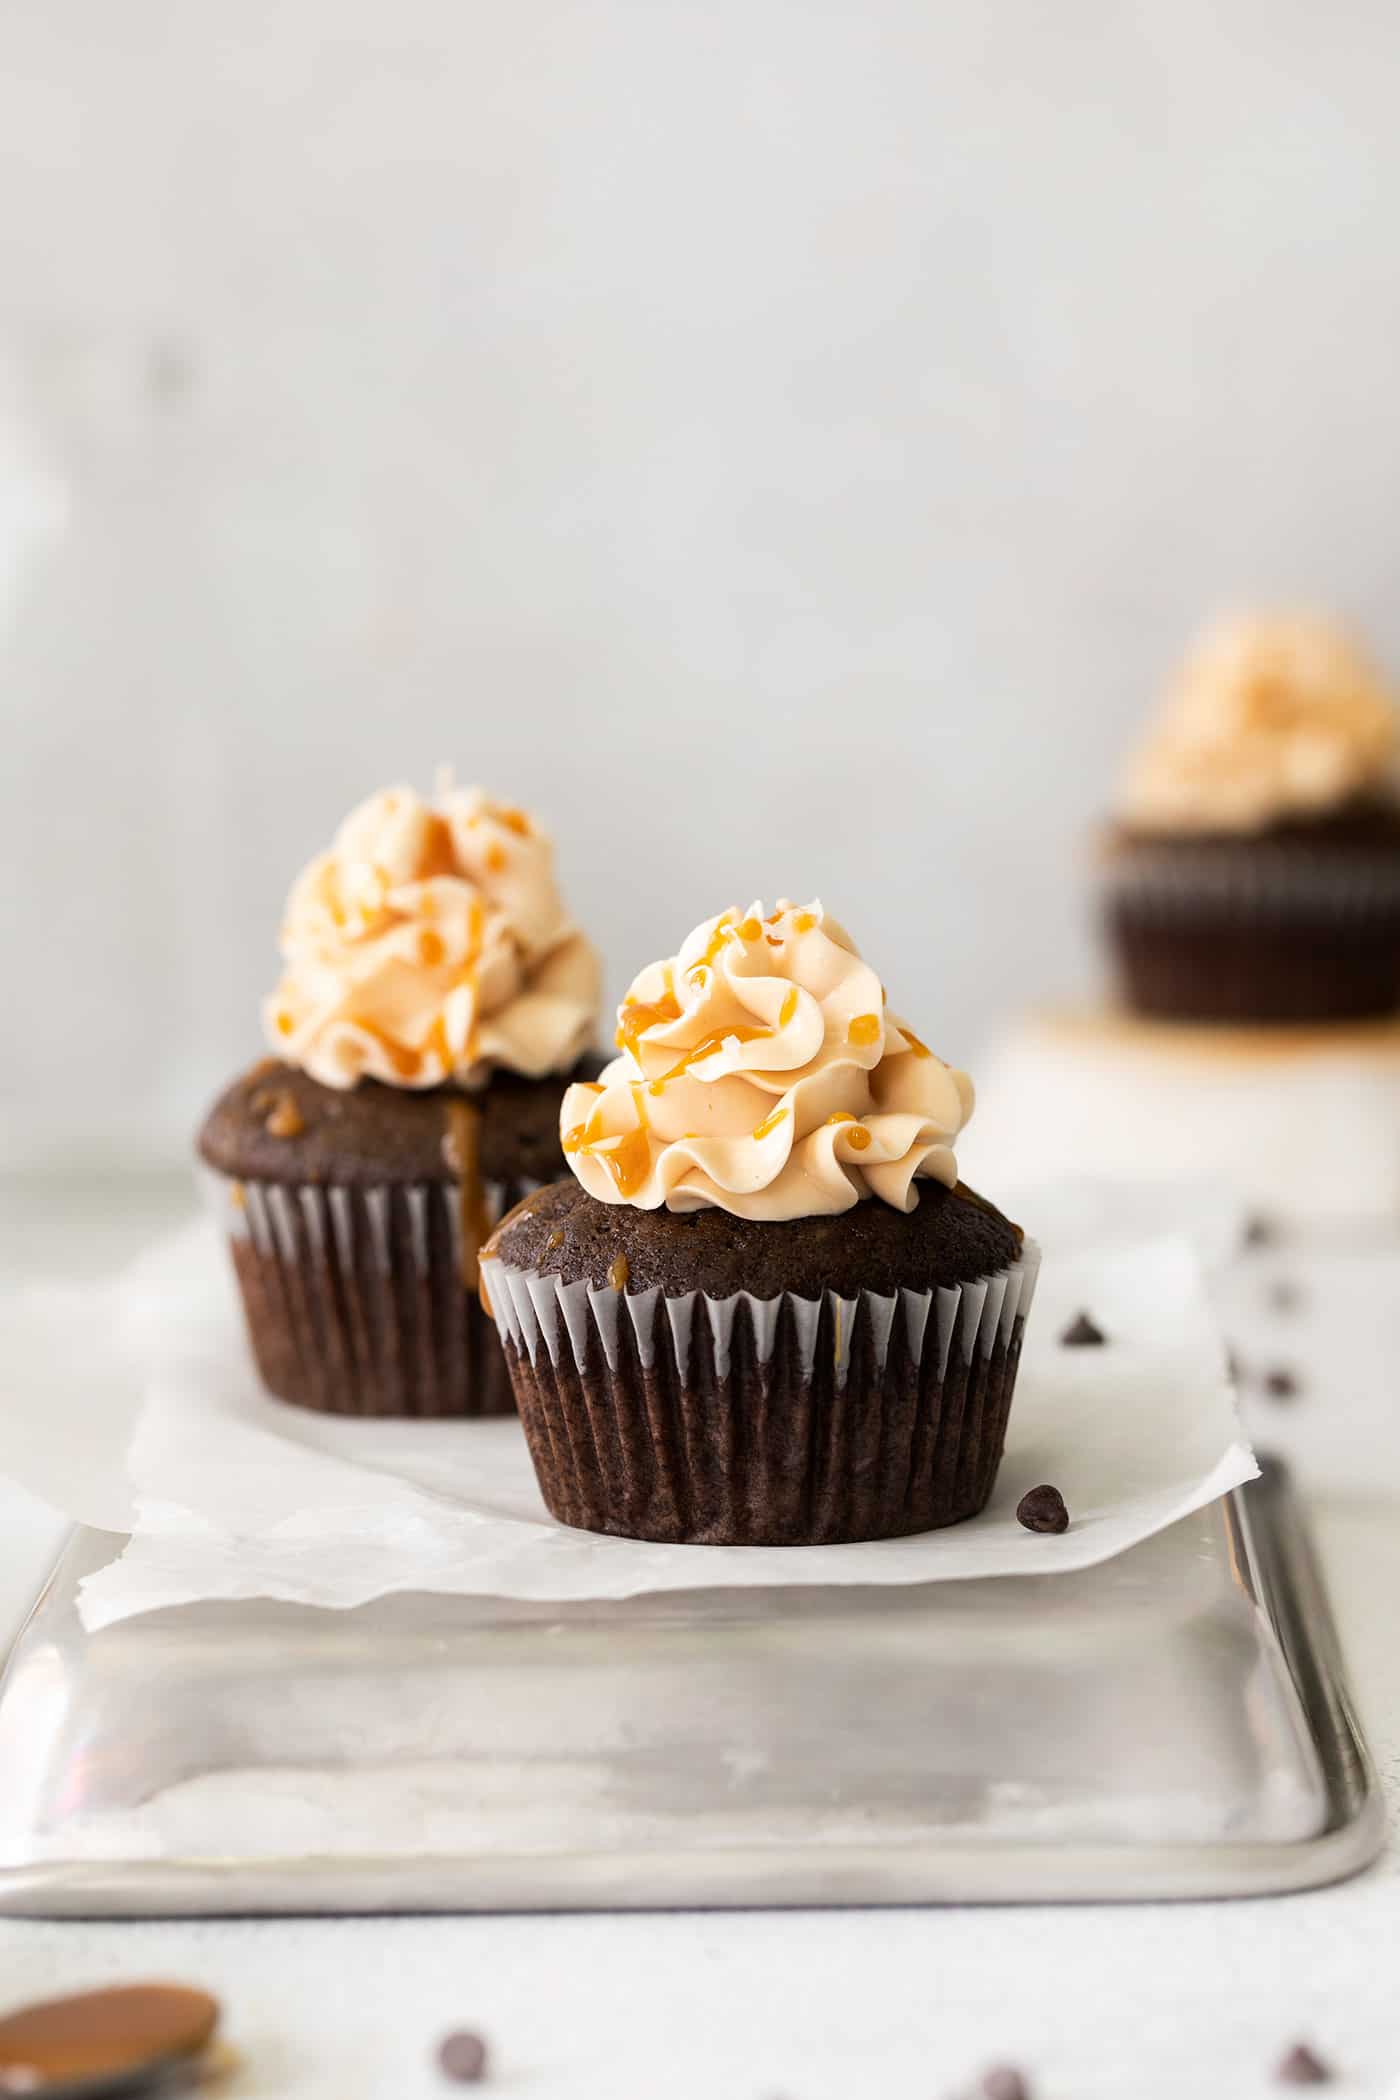 Three chocolate cupcakes frosted and topped with caramel